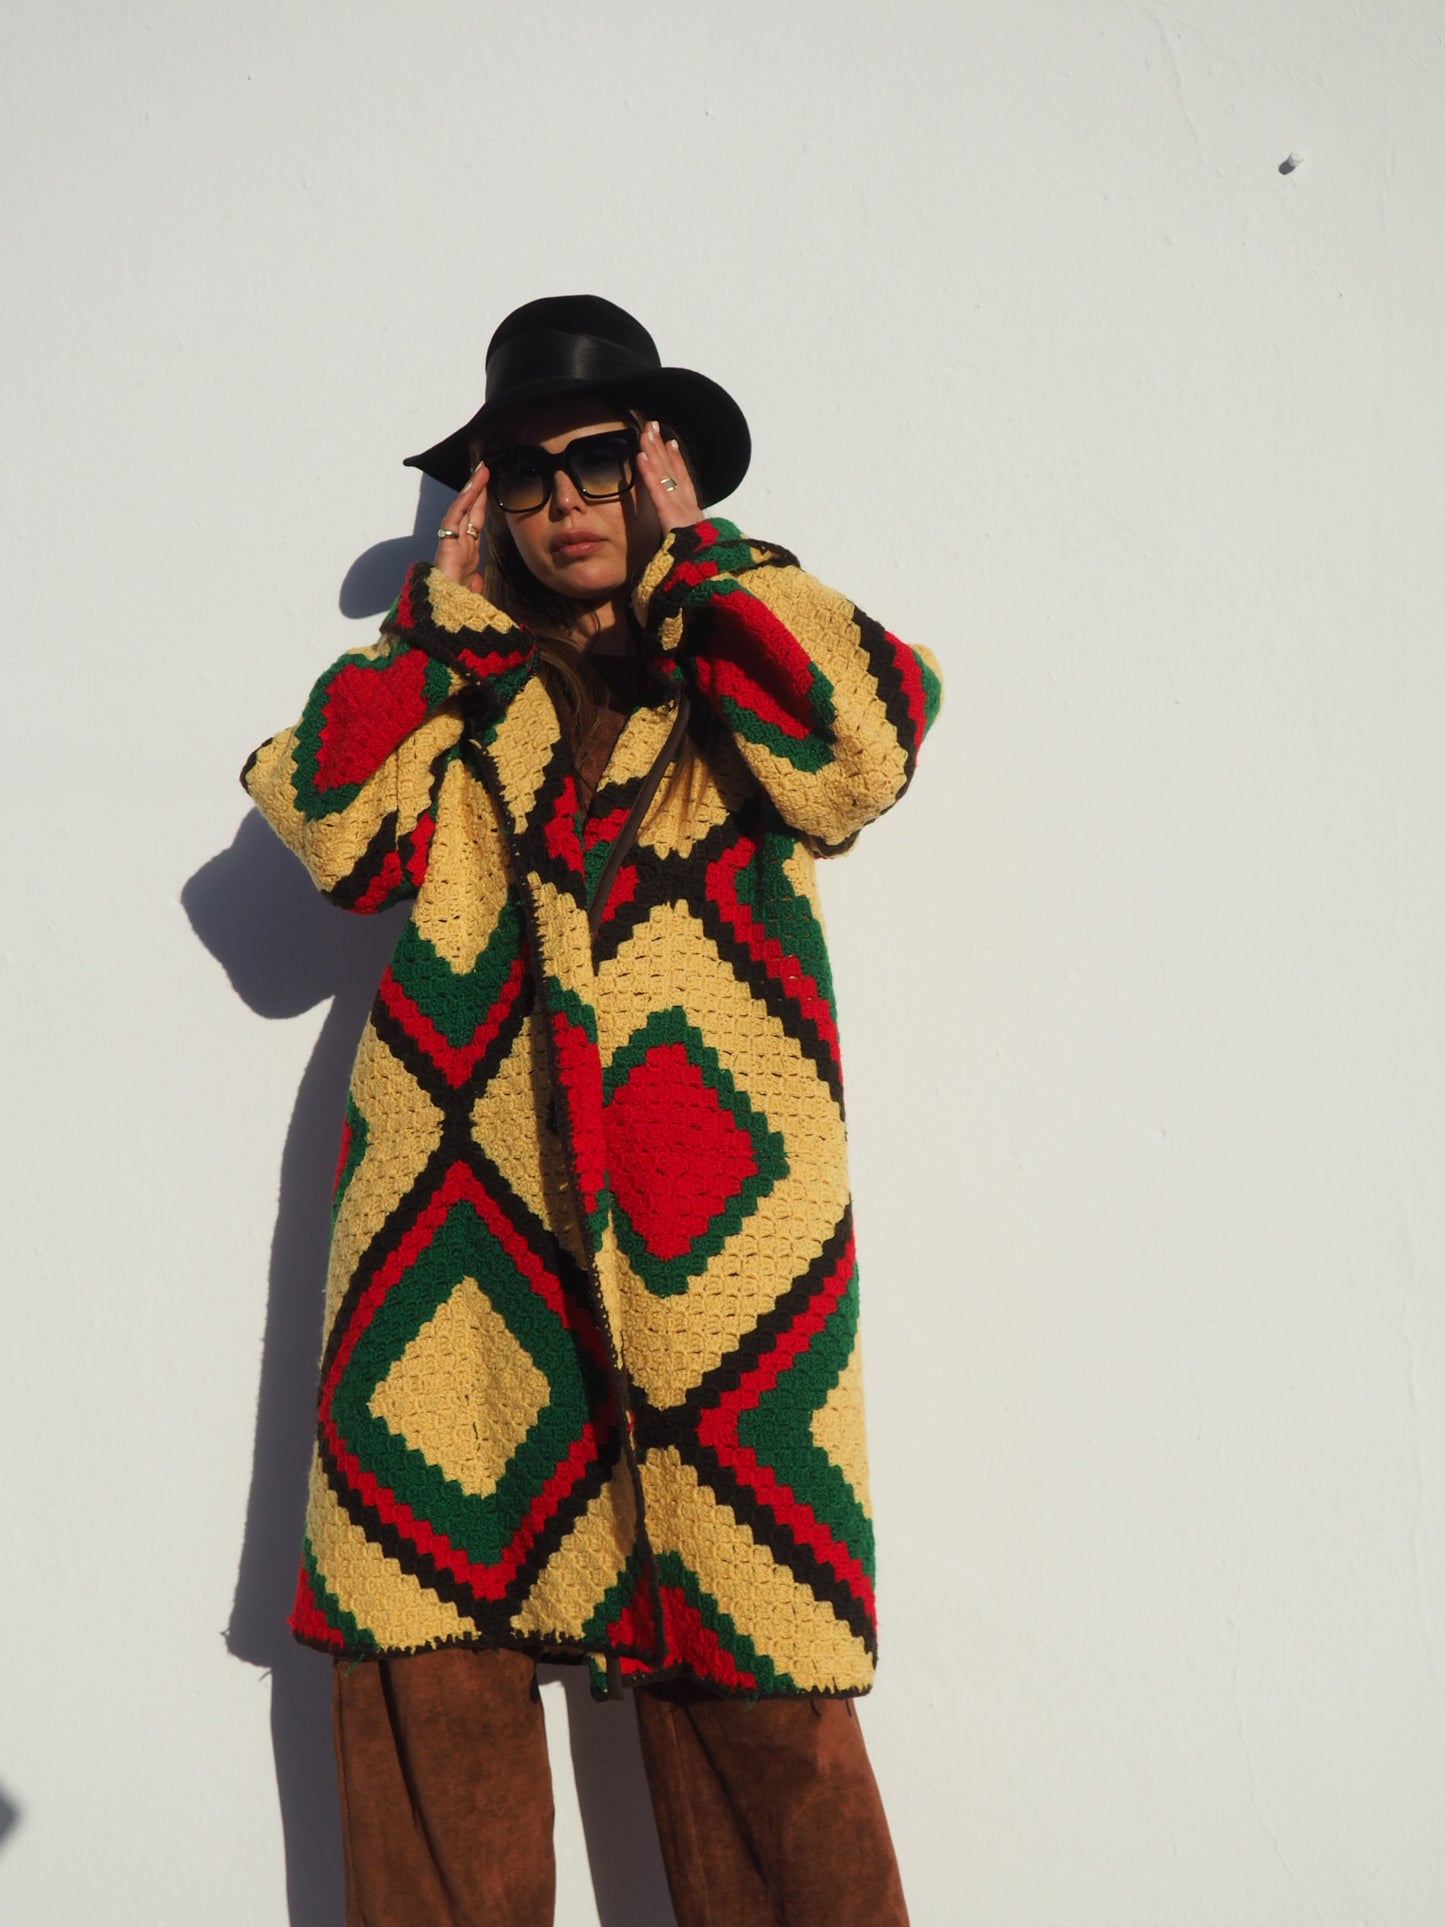 Vintage handmade crochet textiles in yellow green and brown up-cycled jacket by Vagabond Ibiza.